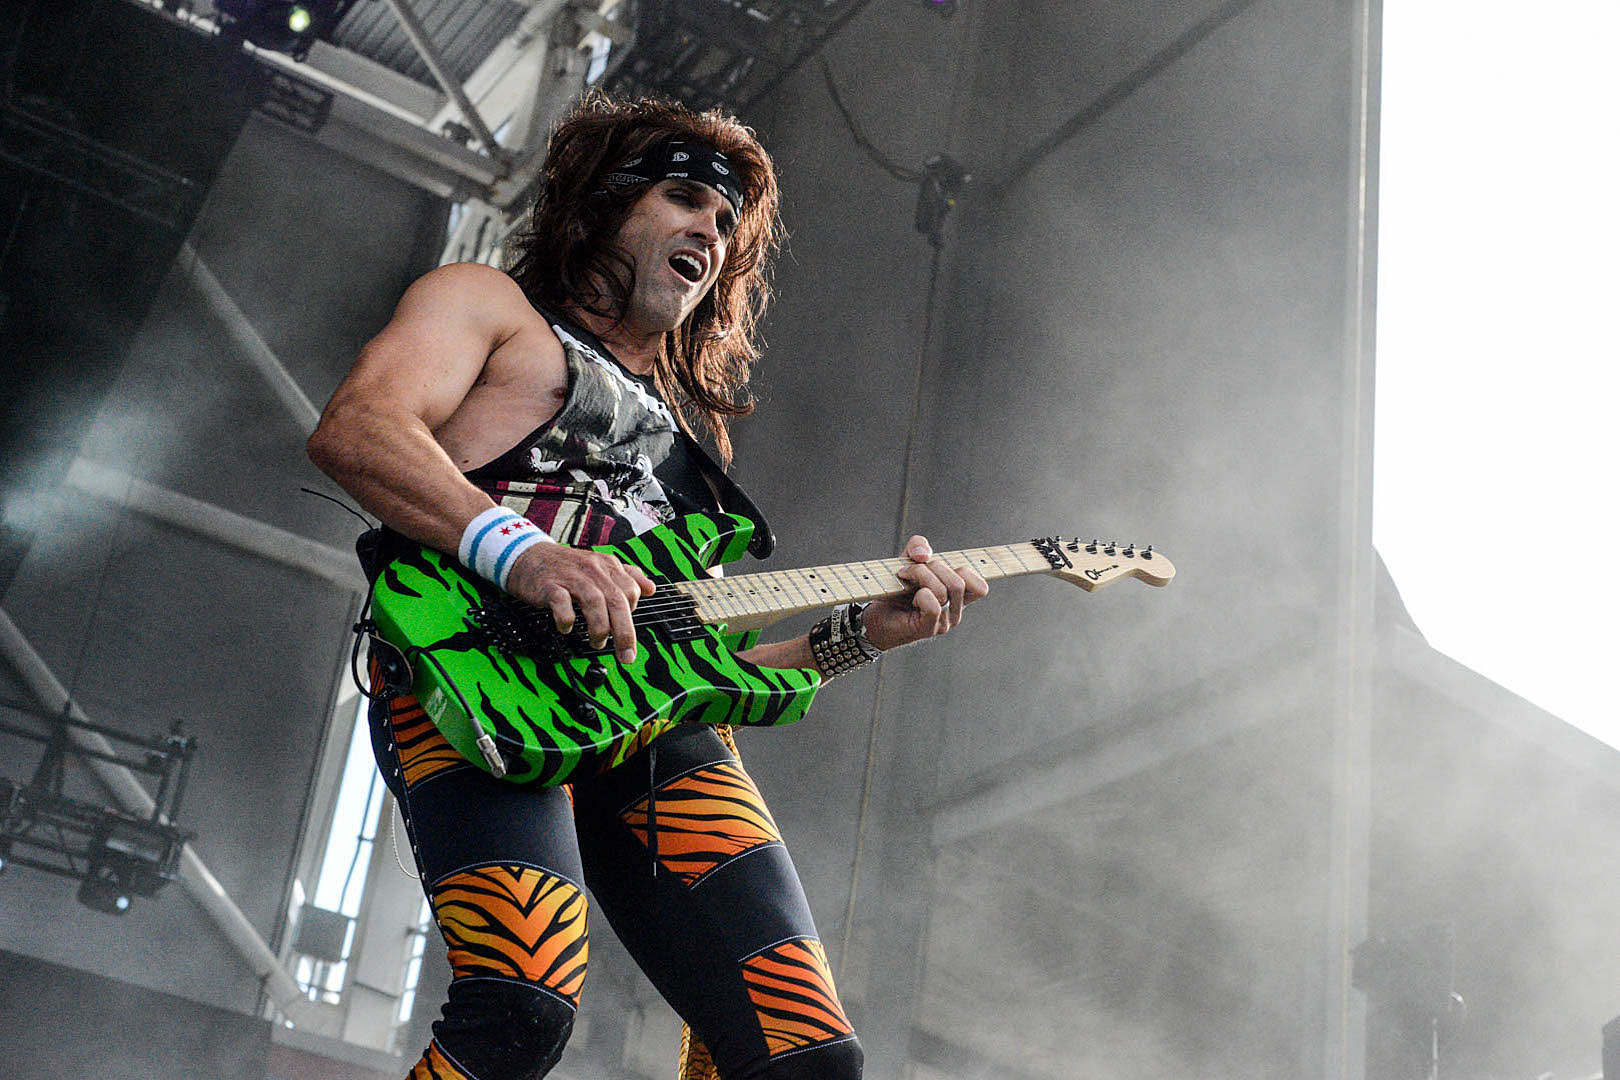 Steel Panther's Satchel 'Pussy Melter' Pedal Causes Backlash